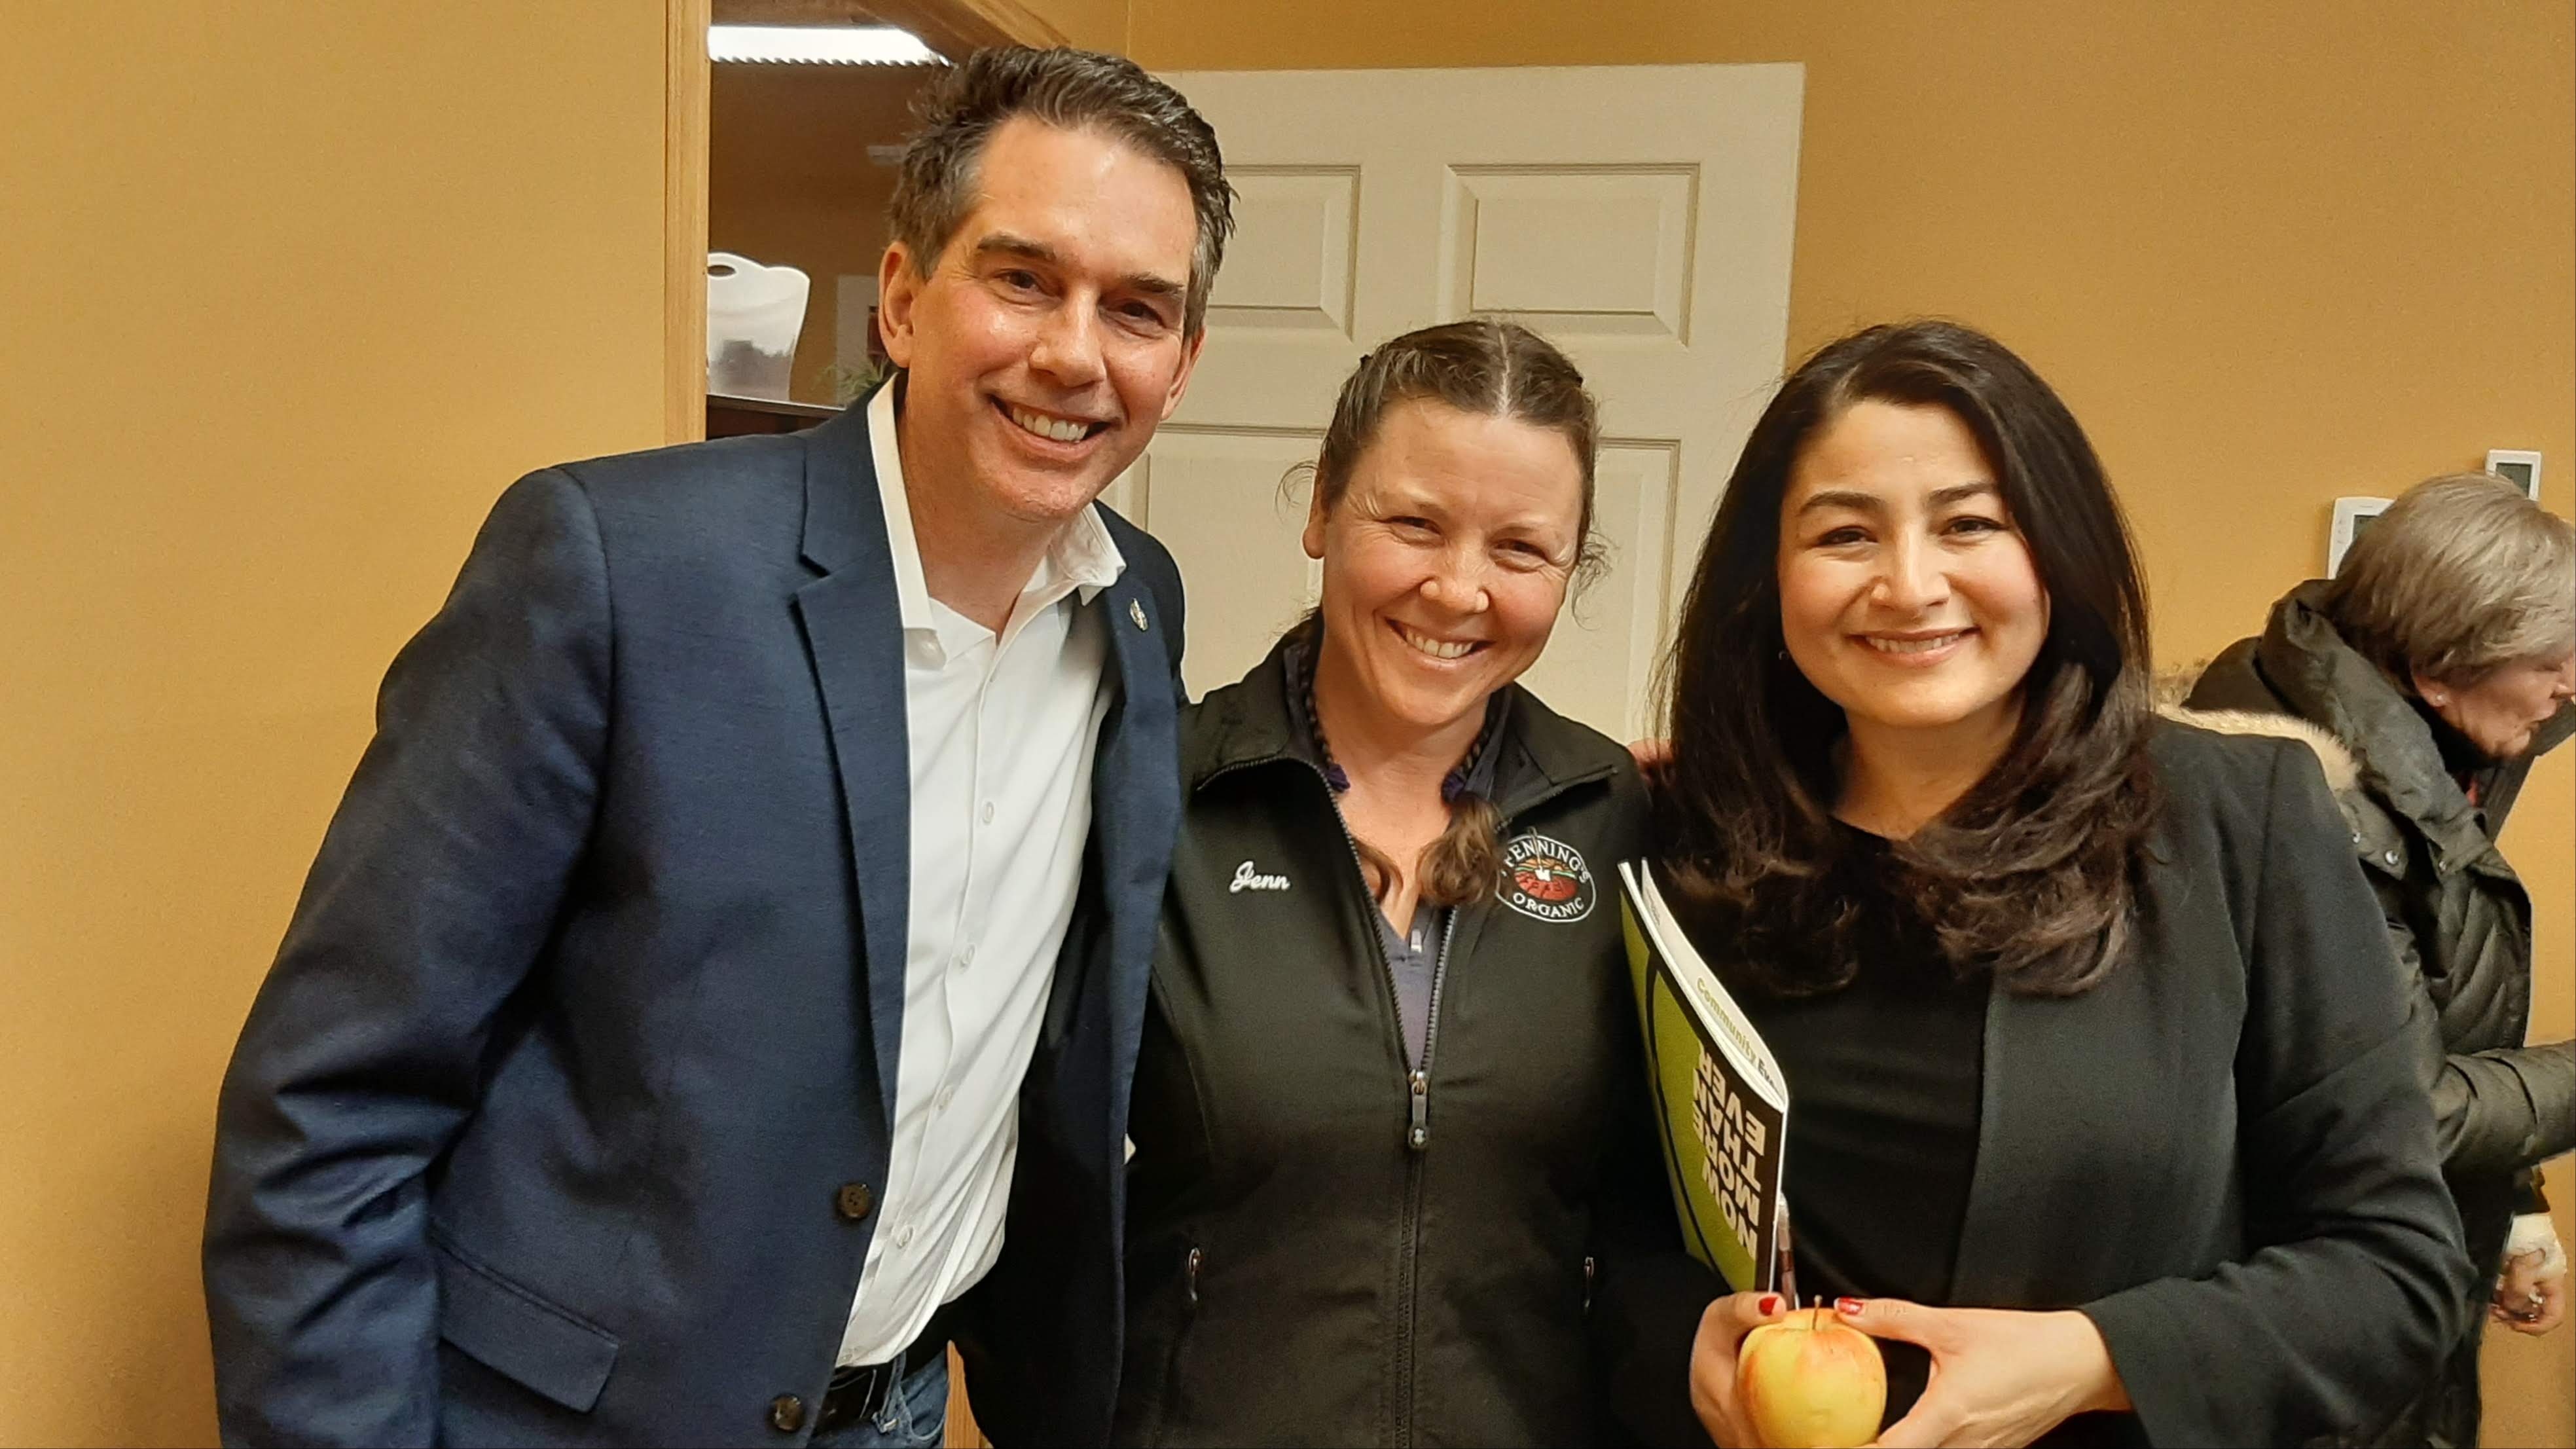 Kitchener-Conestoga MP Tim Louis, who organized the roundtable discussion, with Wilmot councillor/farm owner Jenn Pfenning, and Maryam Monsef, federal Minister for Women and Gender Equality and Rural Economic Development.